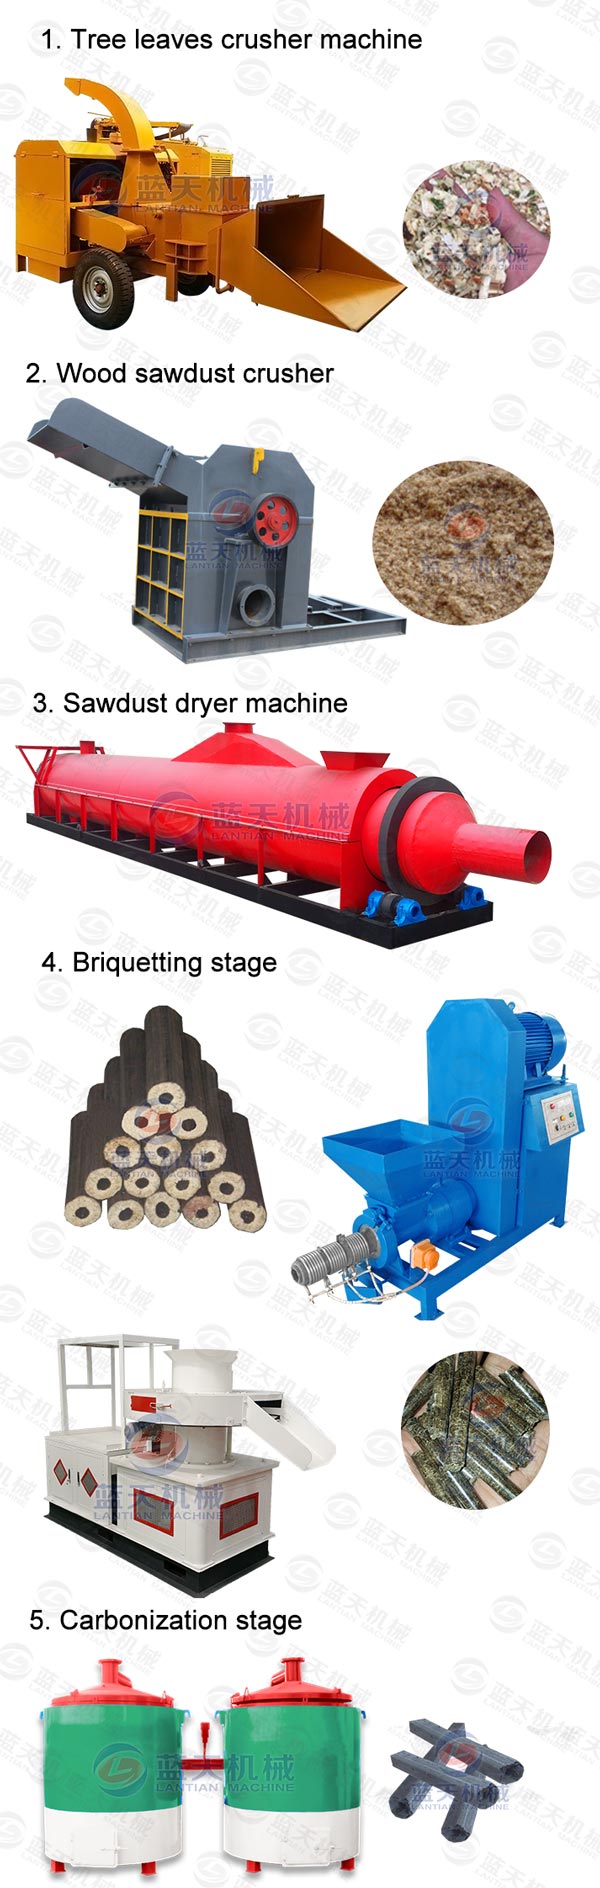 Product Line of Tree Leaves Crusher